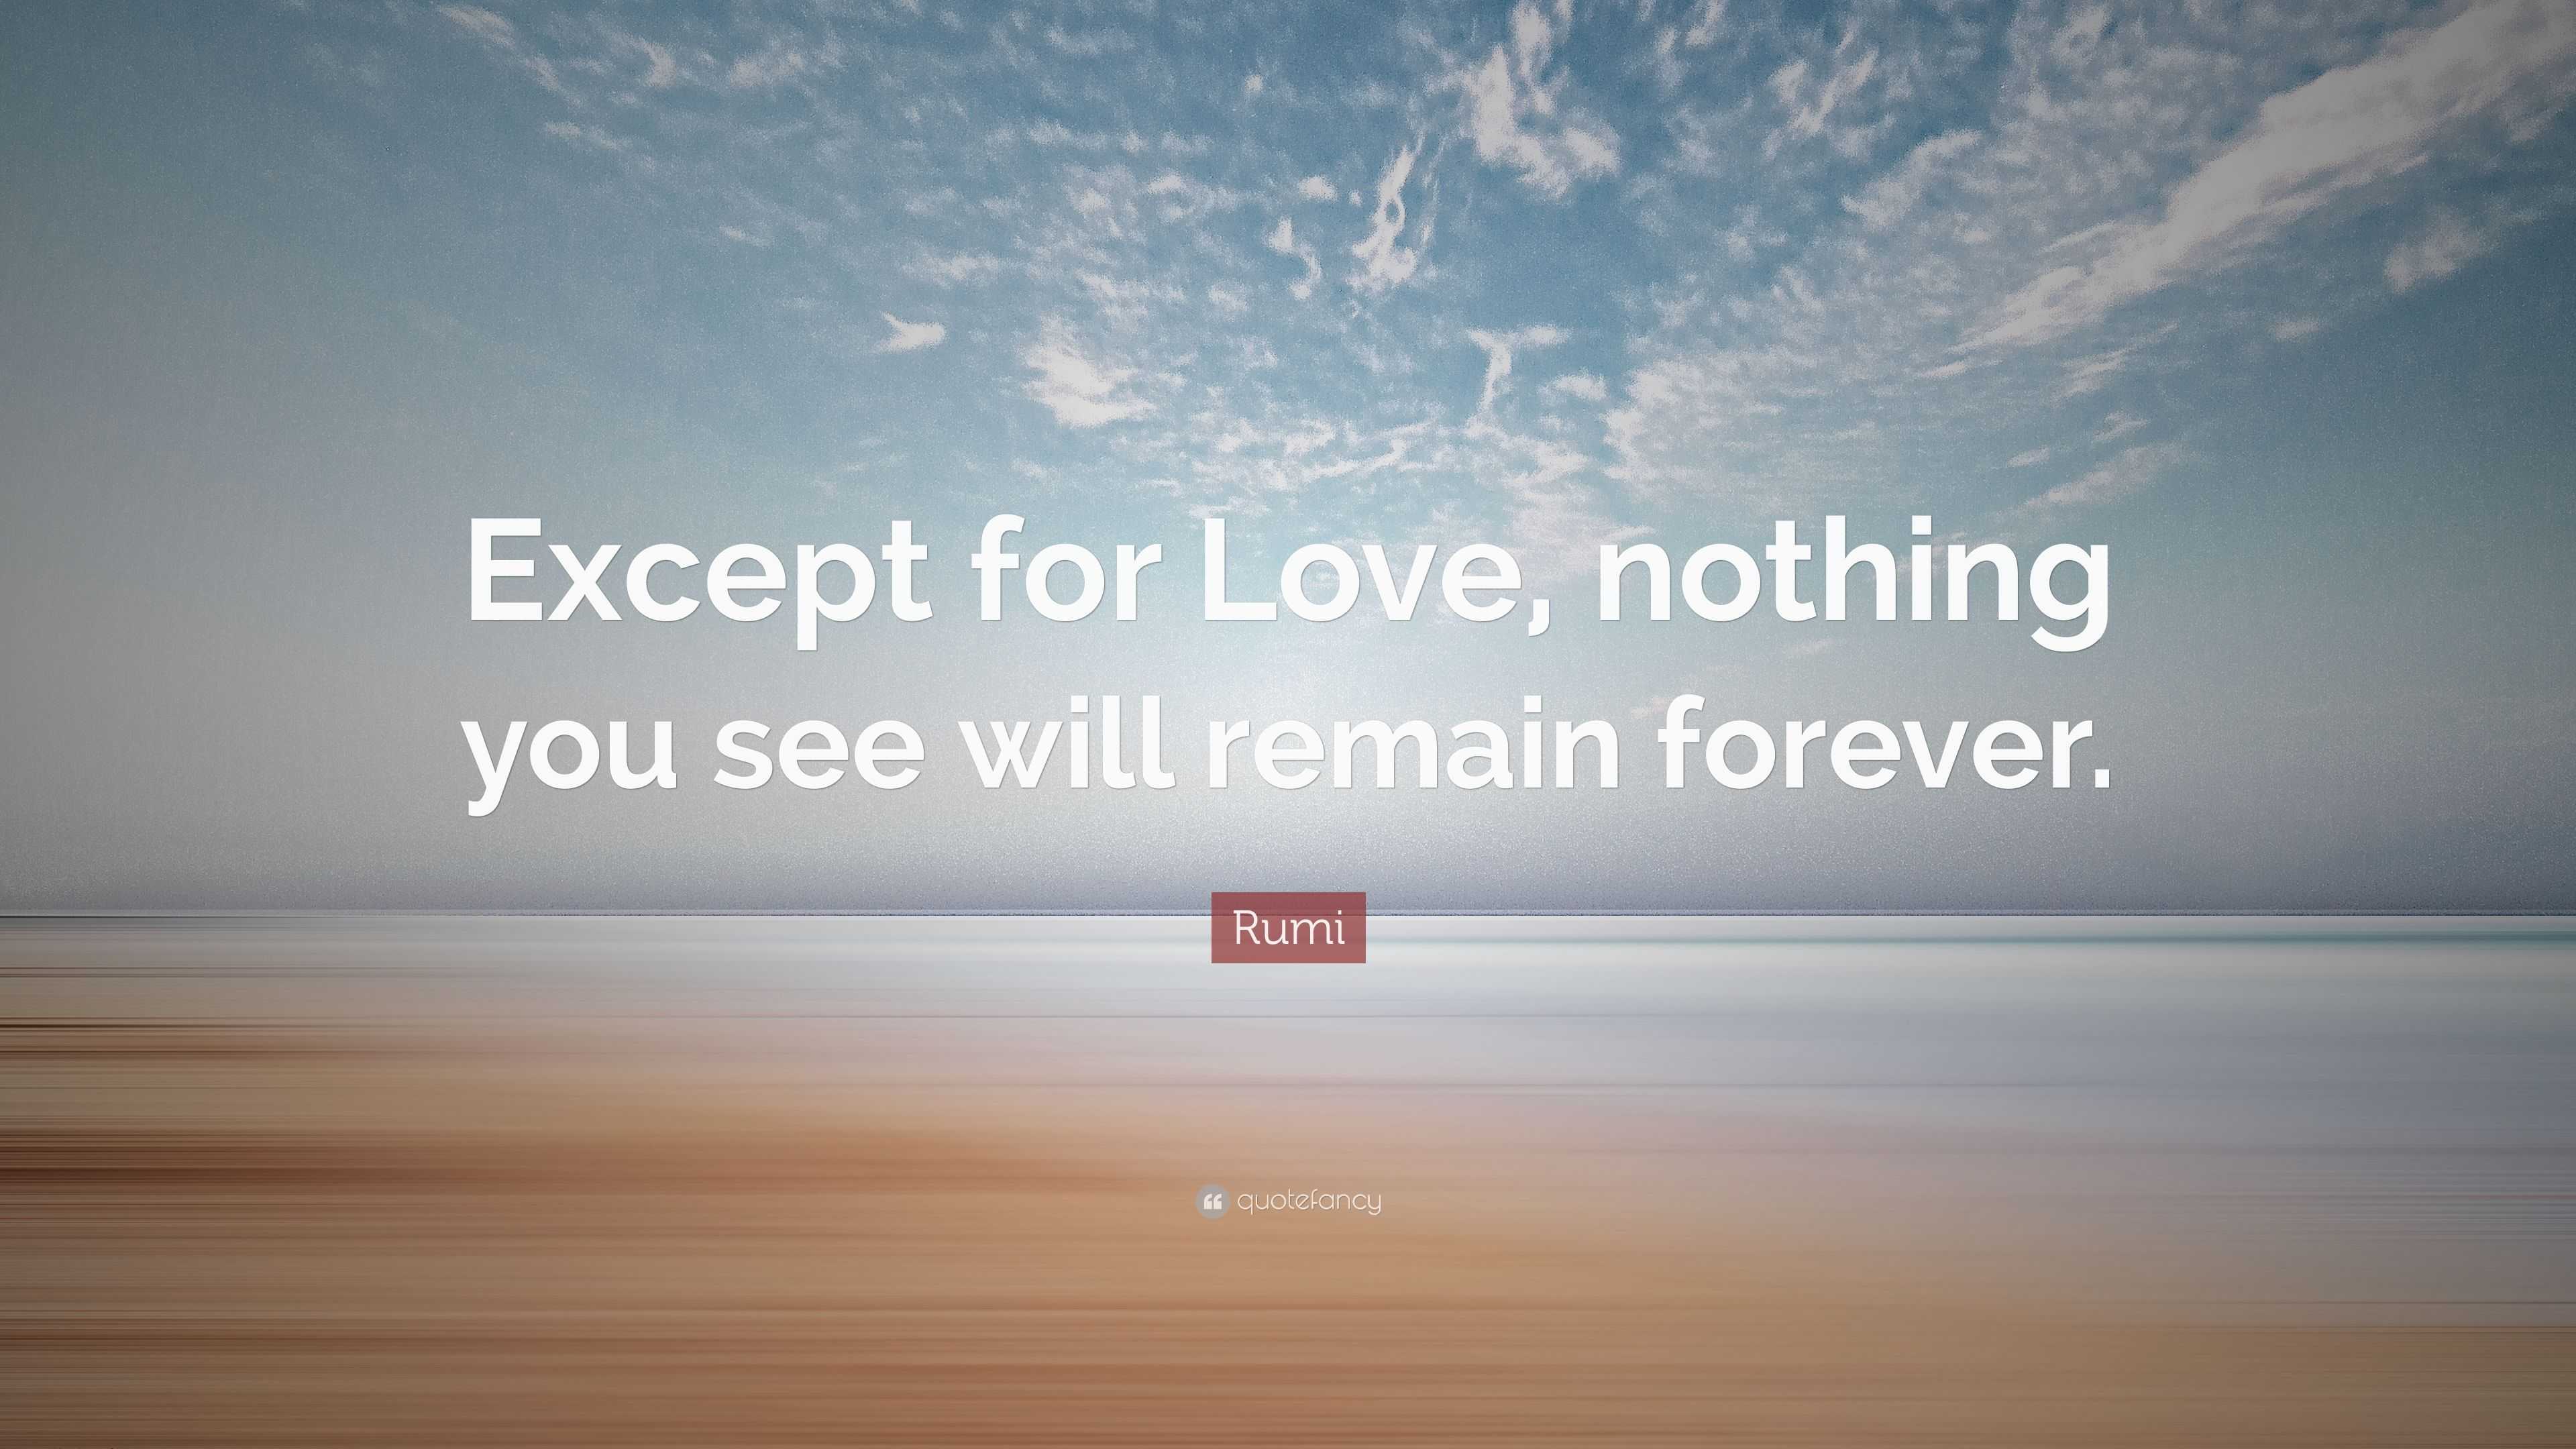 Rumi Quote: “Except for Love, nothing you see will remain forever.”